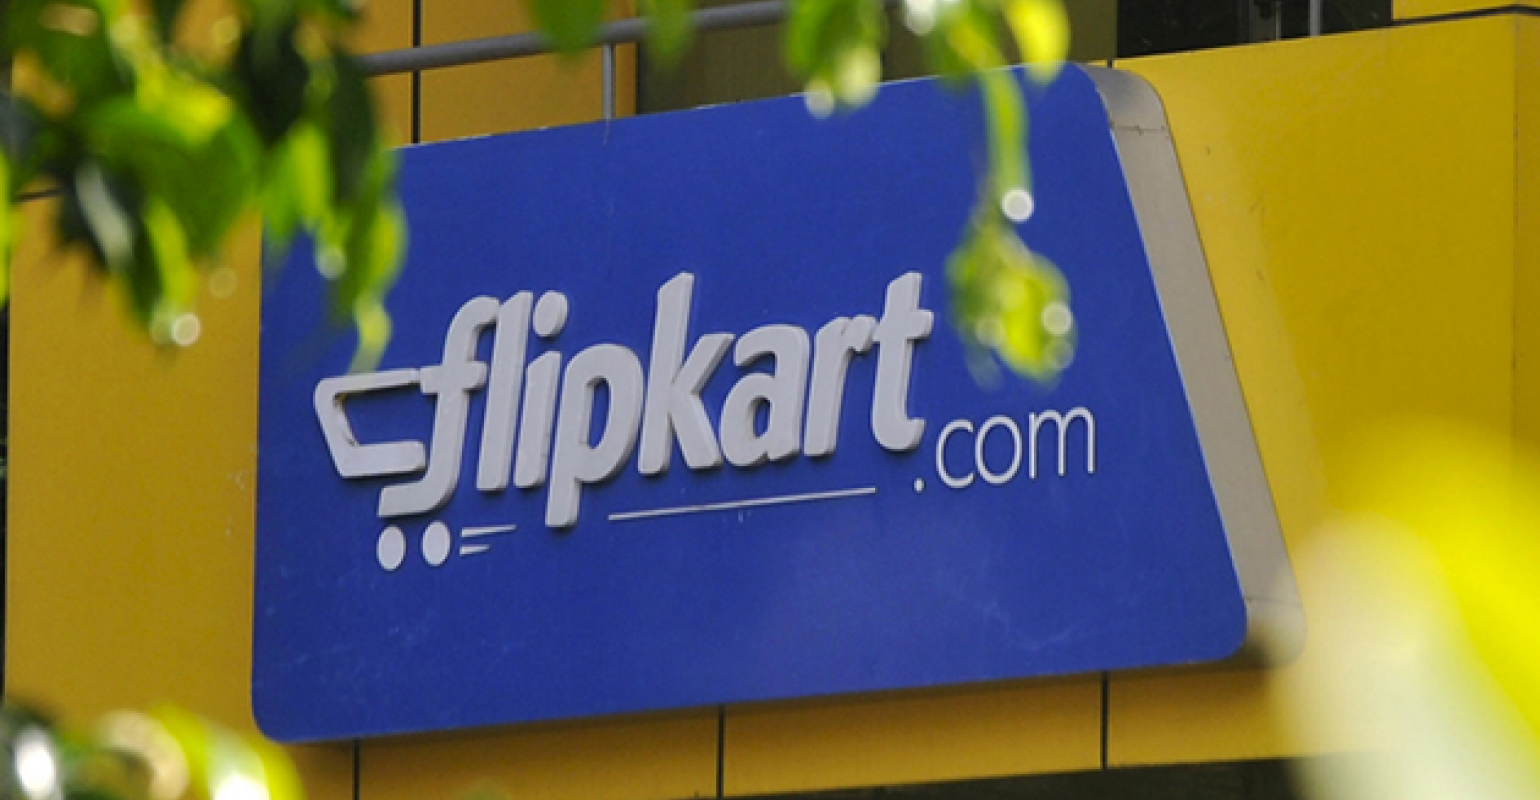 From December 21 to 23, heavy discounts will be available on these smartphones in Flipkart's year and sale